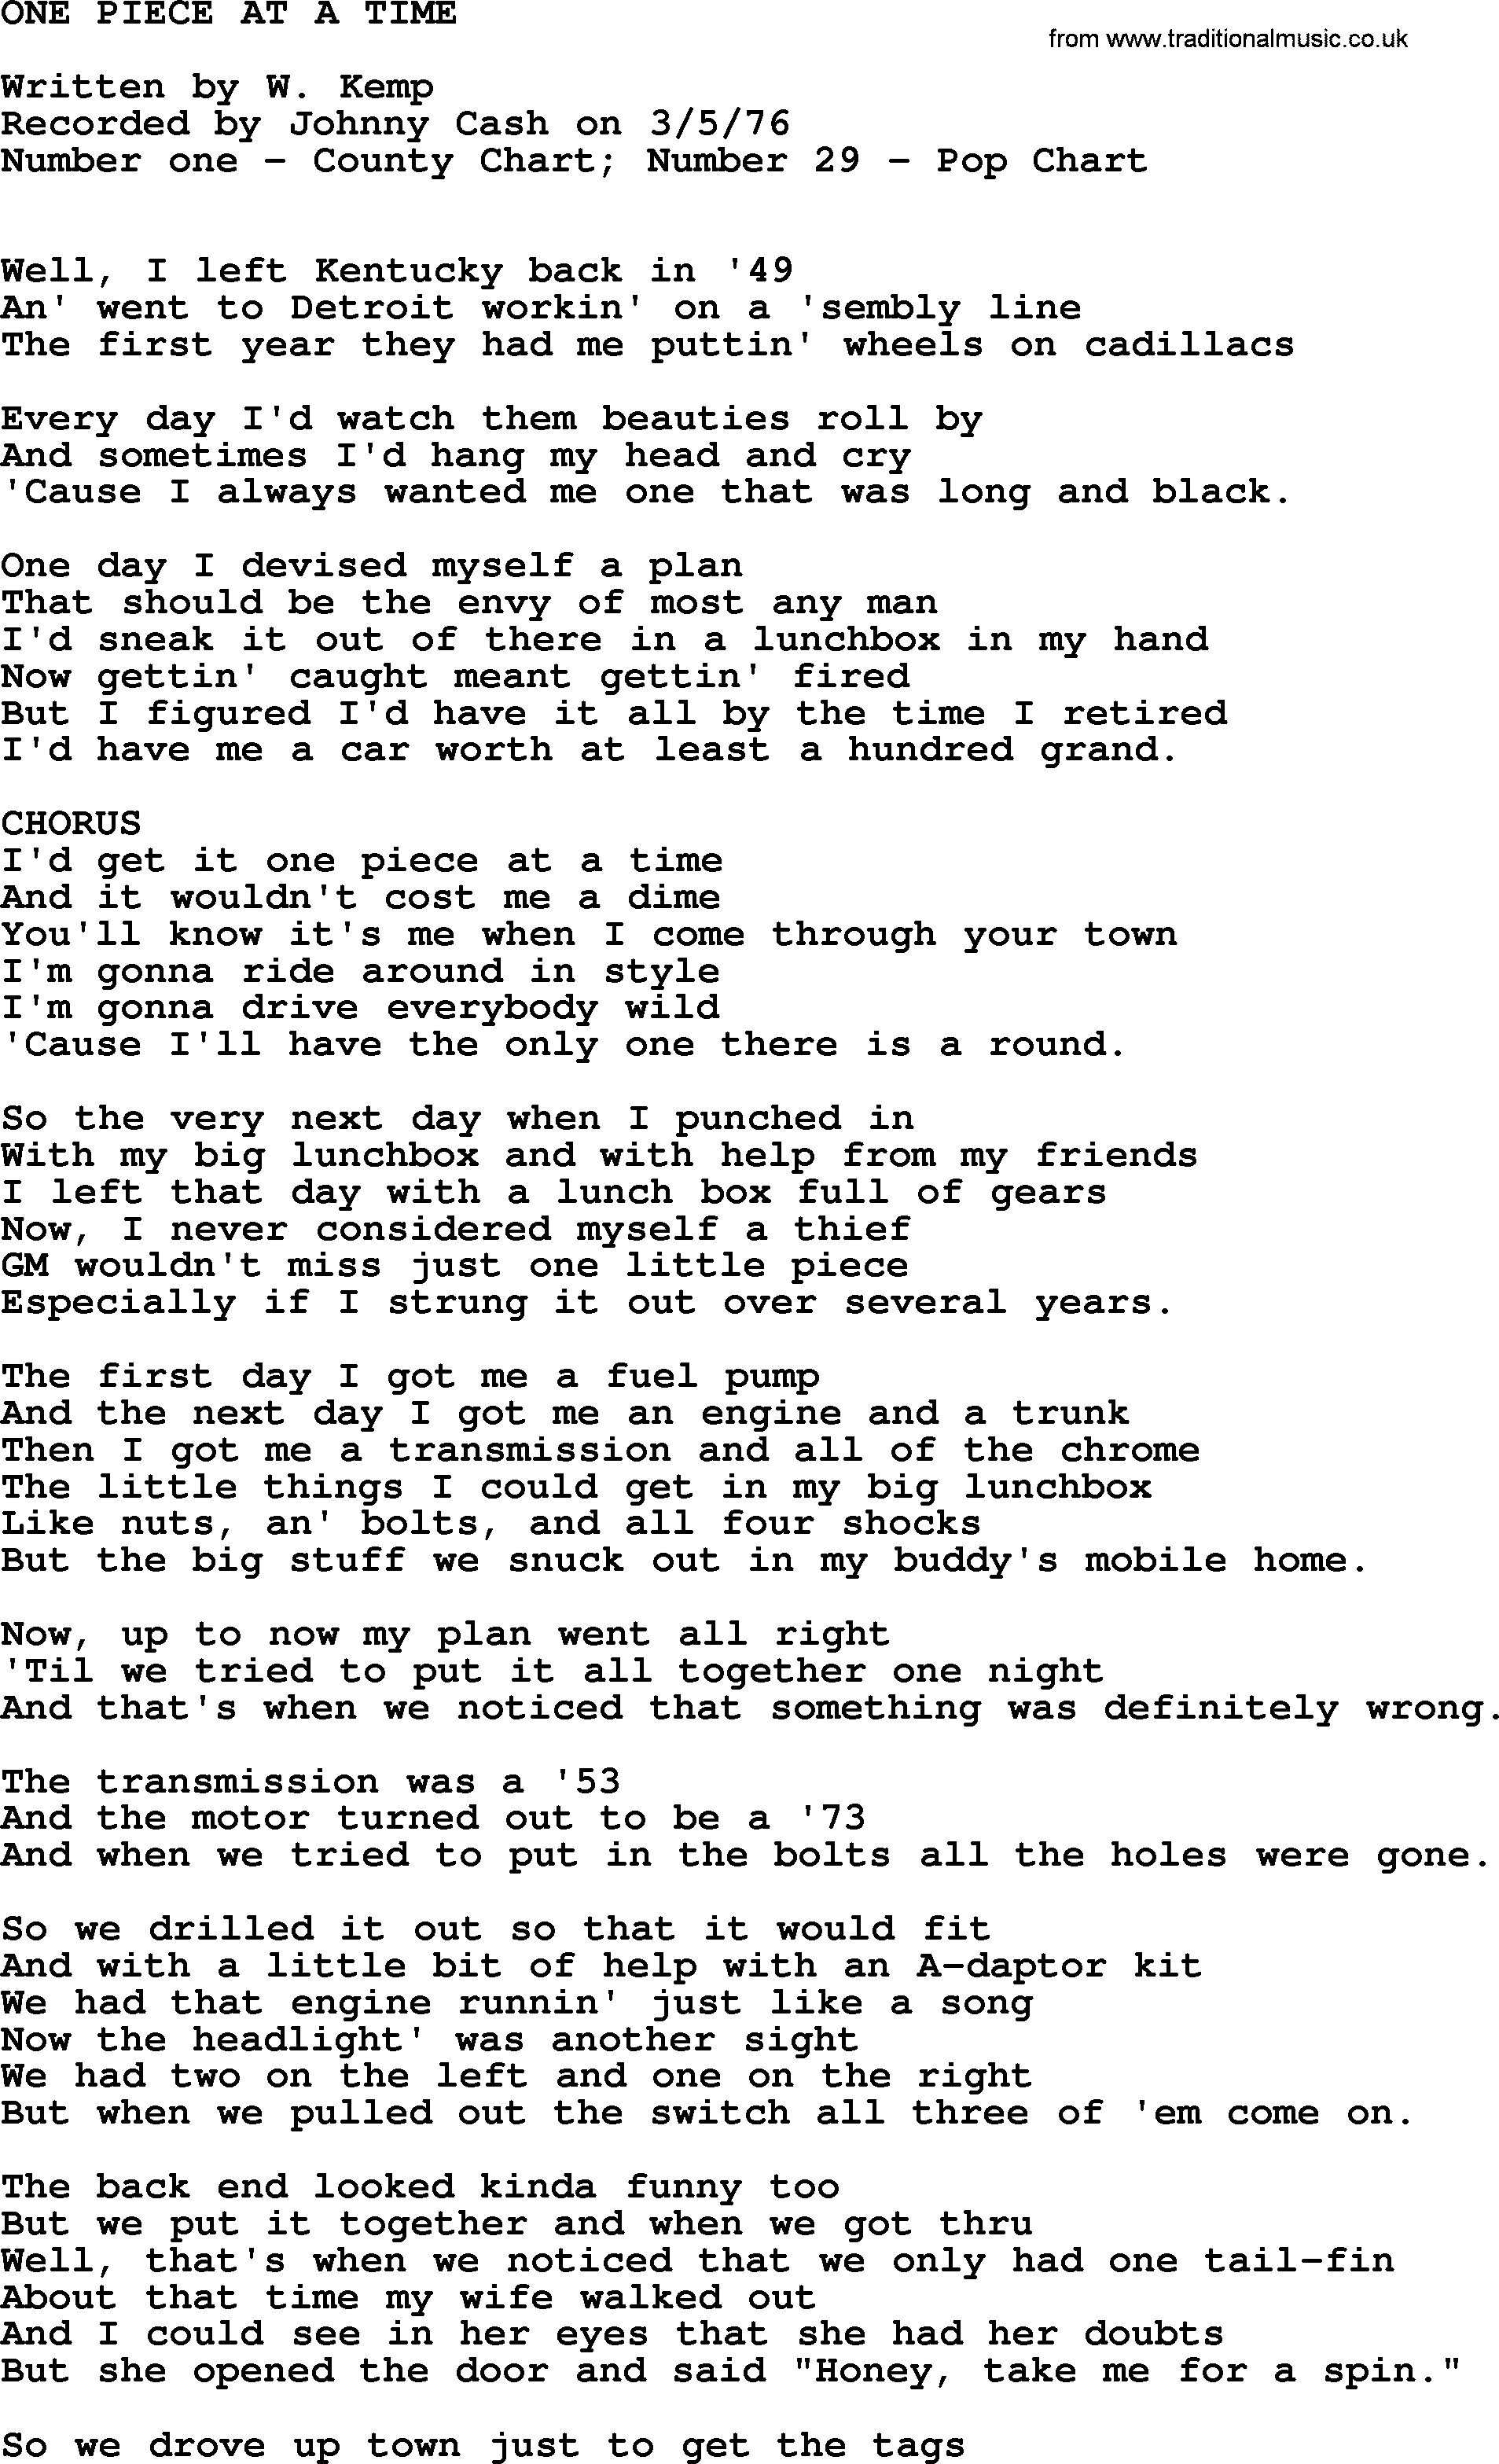 Johnny Cash song One Piece At A Time.txt lyrics